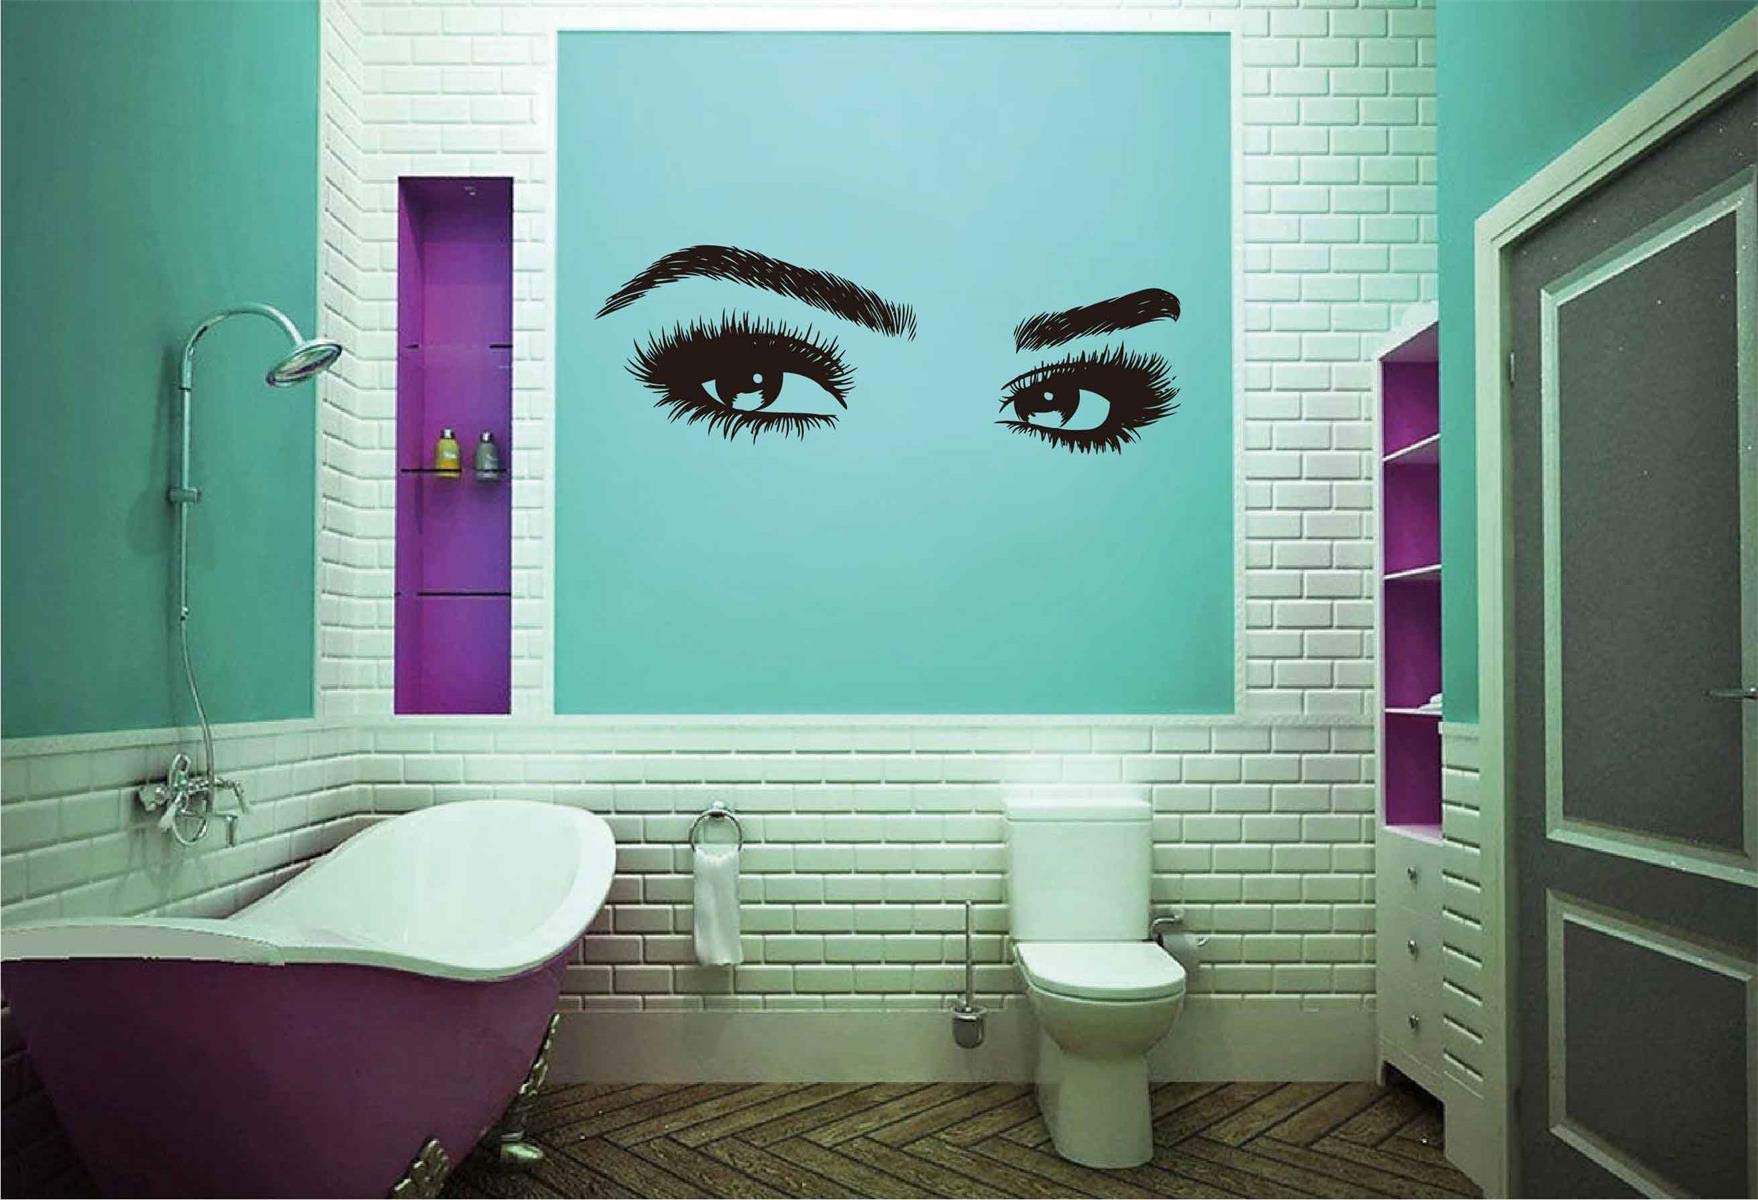 DXLING 42.5X15.3inches Beauty Salon Eyelashes Quote Eyebrow Wall Decor Stickers Make Up Eye Store Home Decoration Murals (LC464 Black)